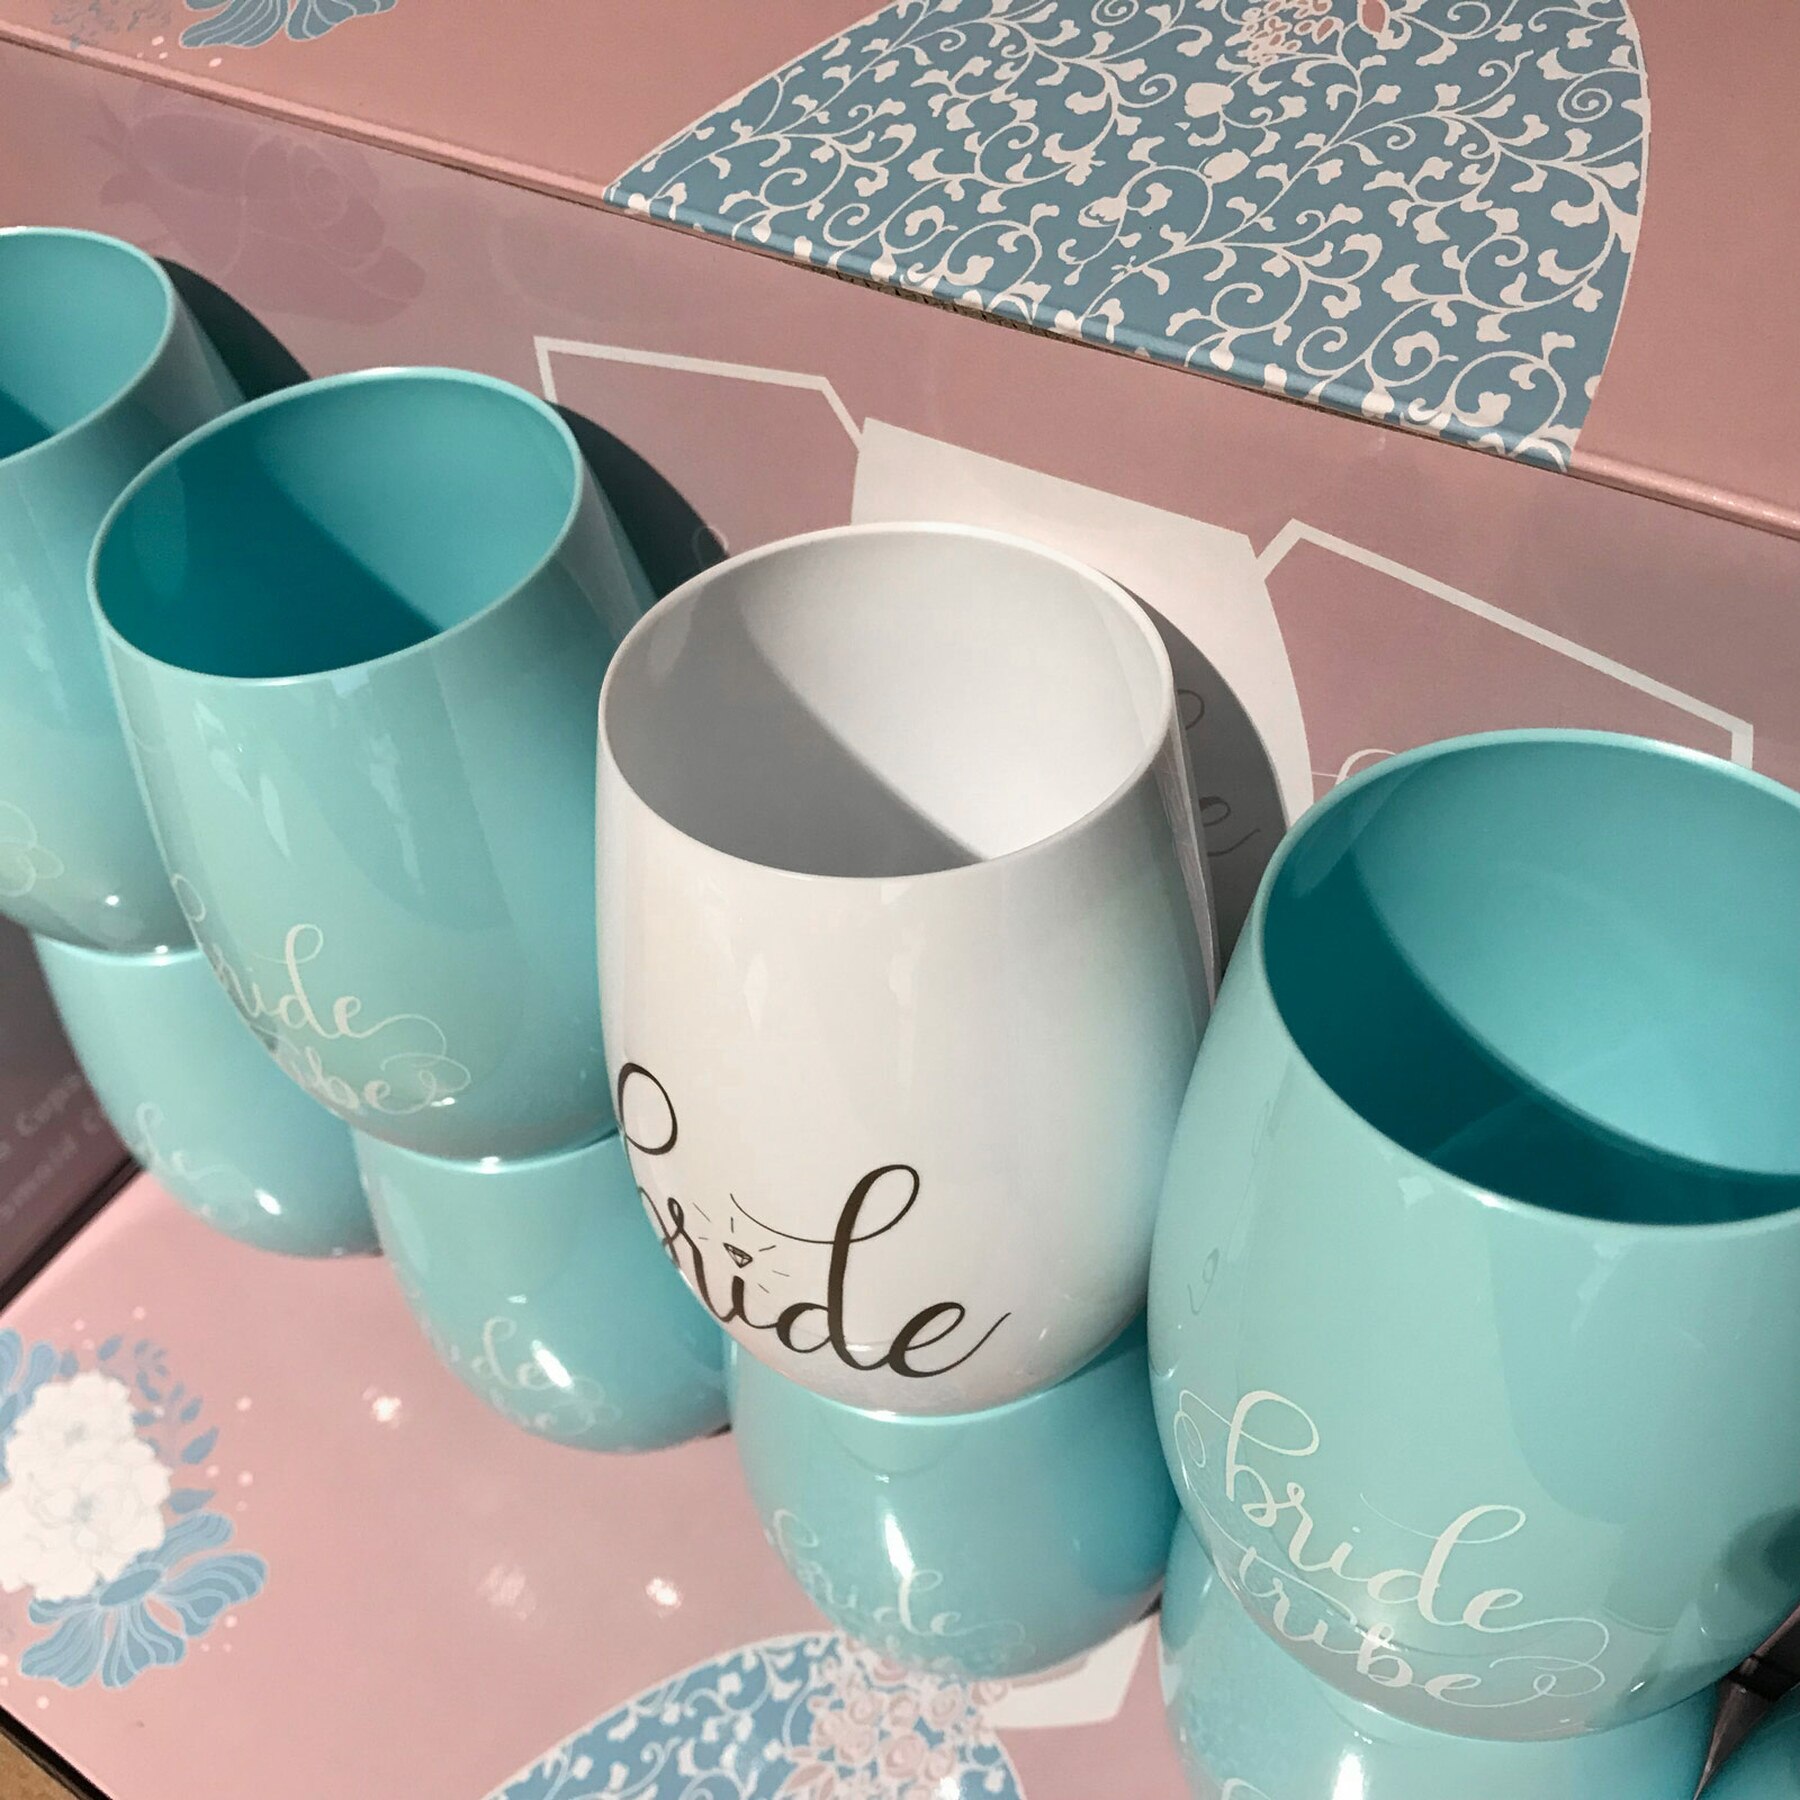 https://cdn11.bigcommerce.com/s-93kae/images/stencil/original/products/236/1442/bride-cups-blue-tribe-10-white-close-up__67137.1563392190__78890.1615152658.jpg?c=2